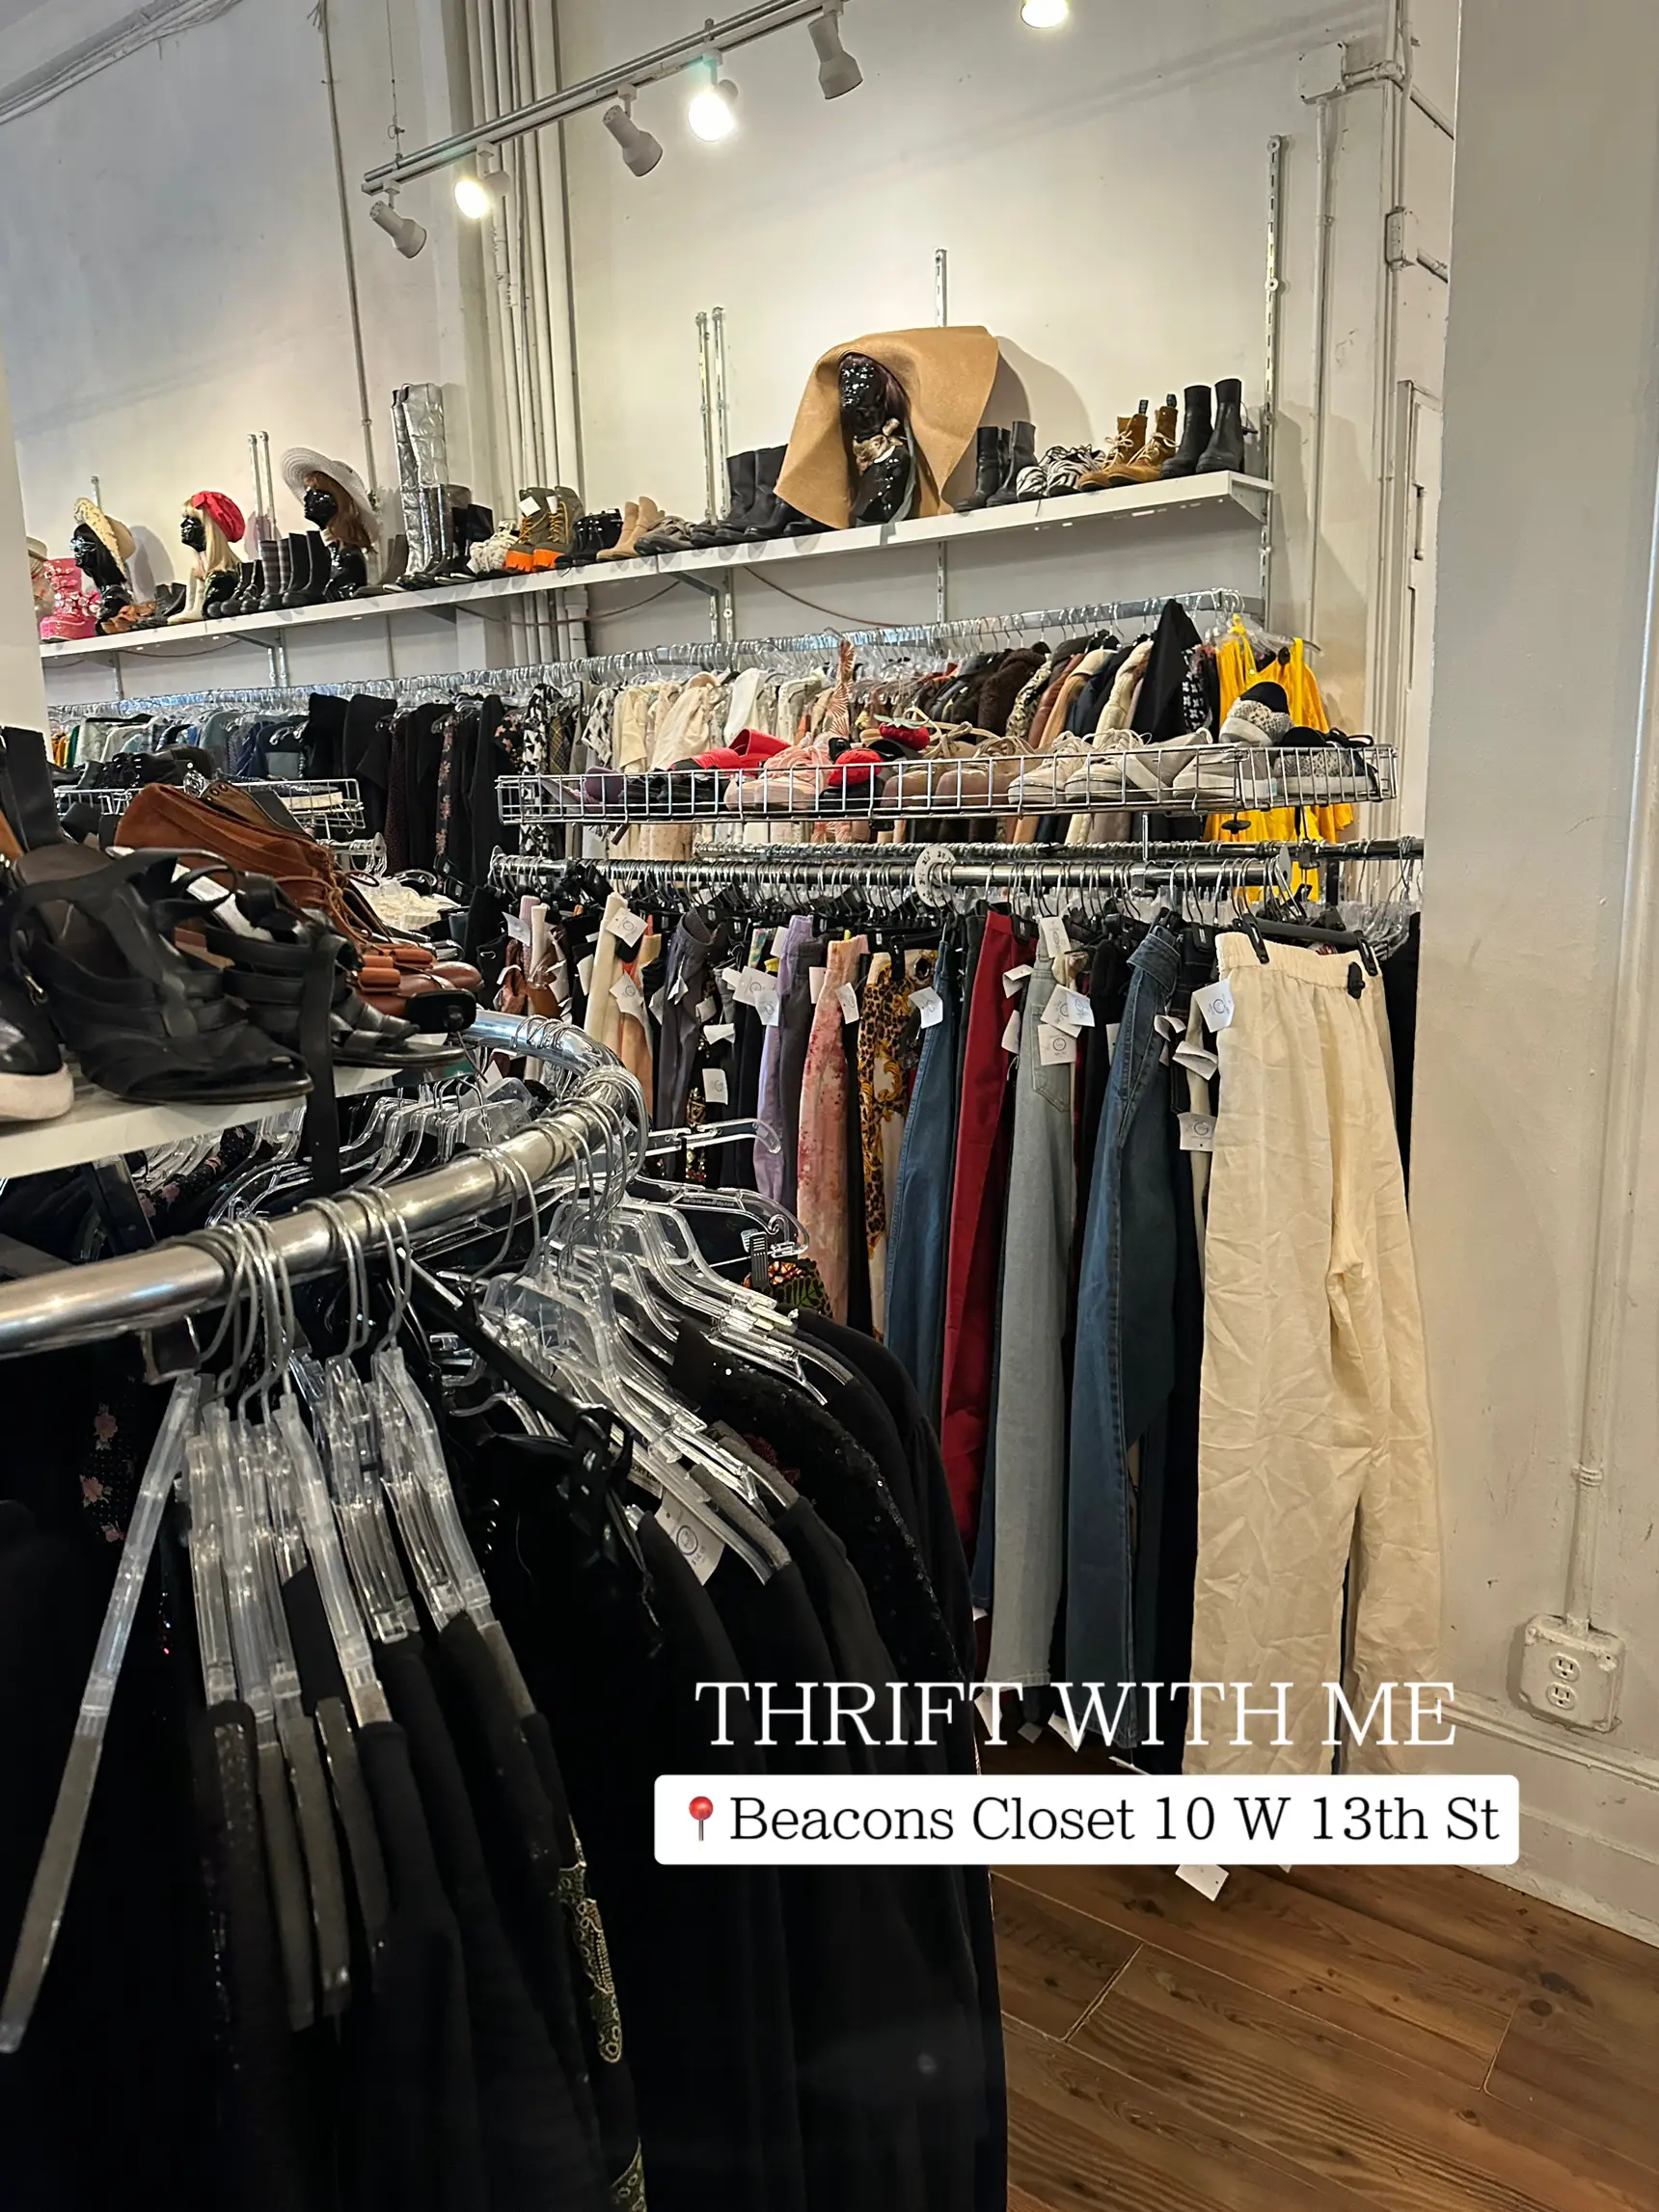 NYC Thrift Store Review: 2nd street, Gallery posted by Stephanieleigh